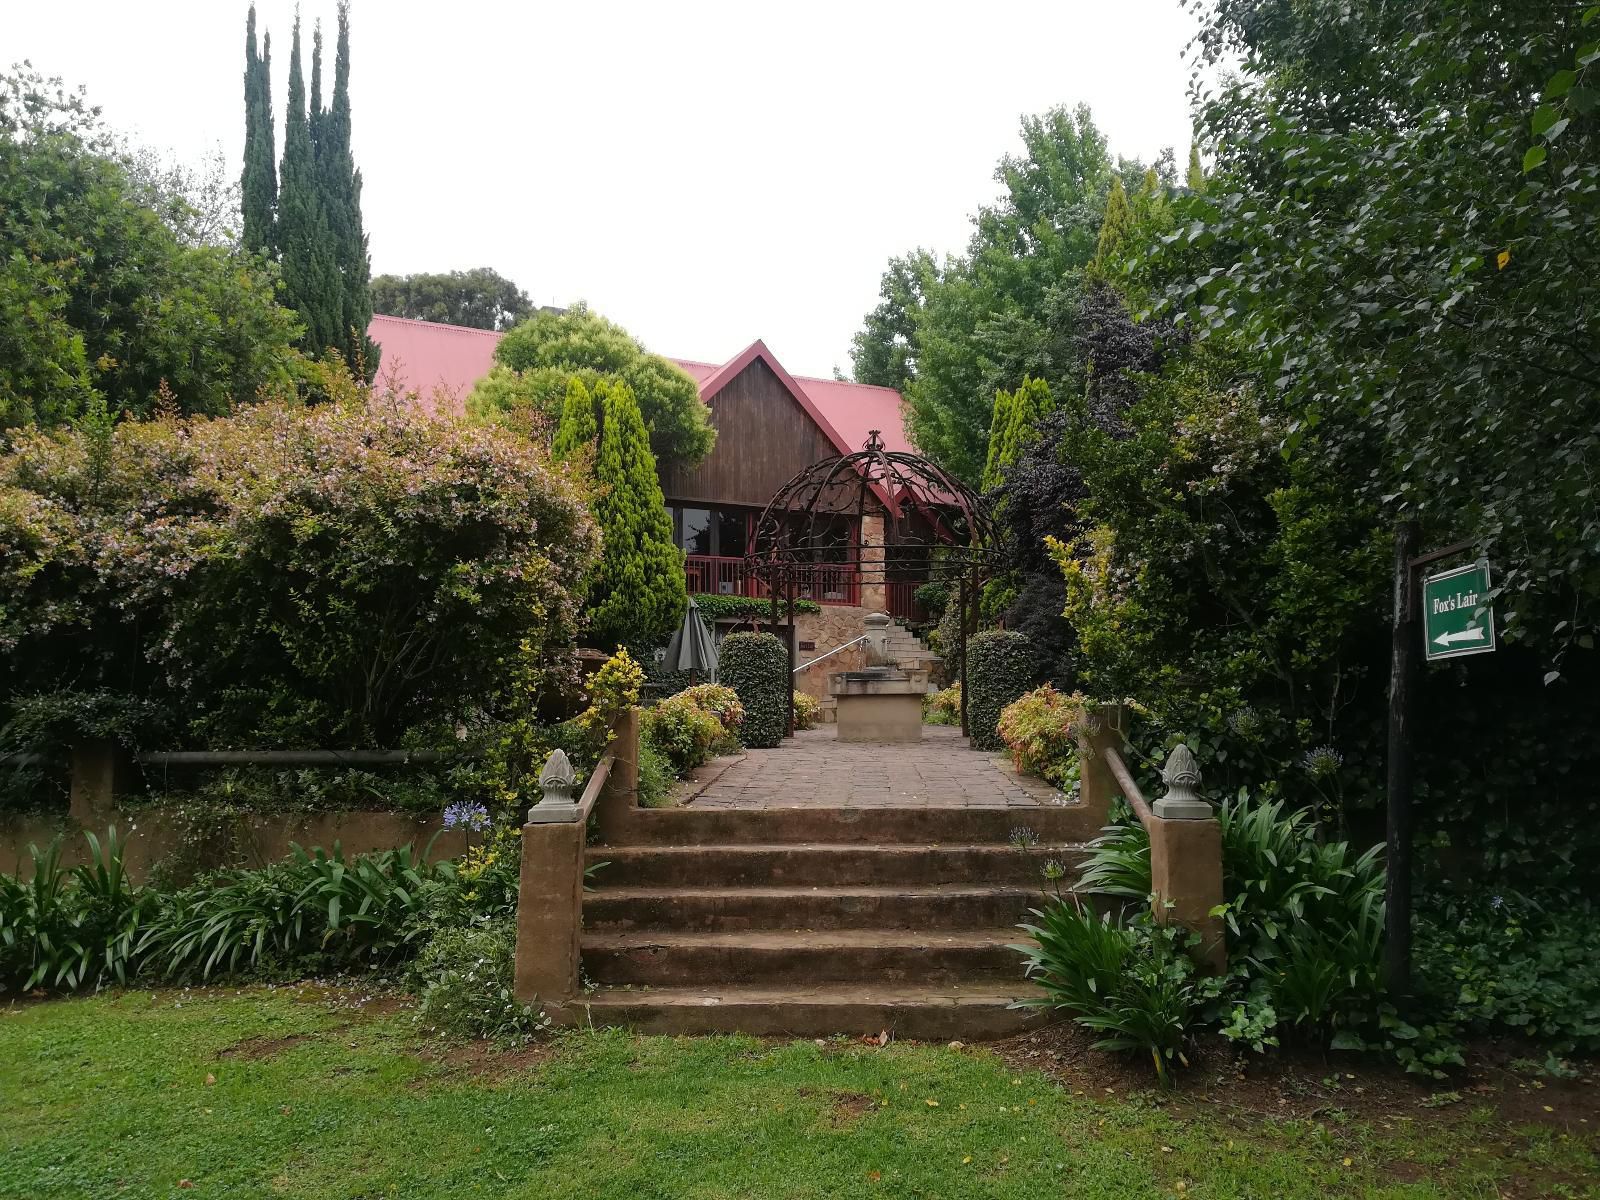 Fox Hill Guest House Dullstroom Mpumalanga South Africa House, Building, Architecture, Garden, Nature, Plant